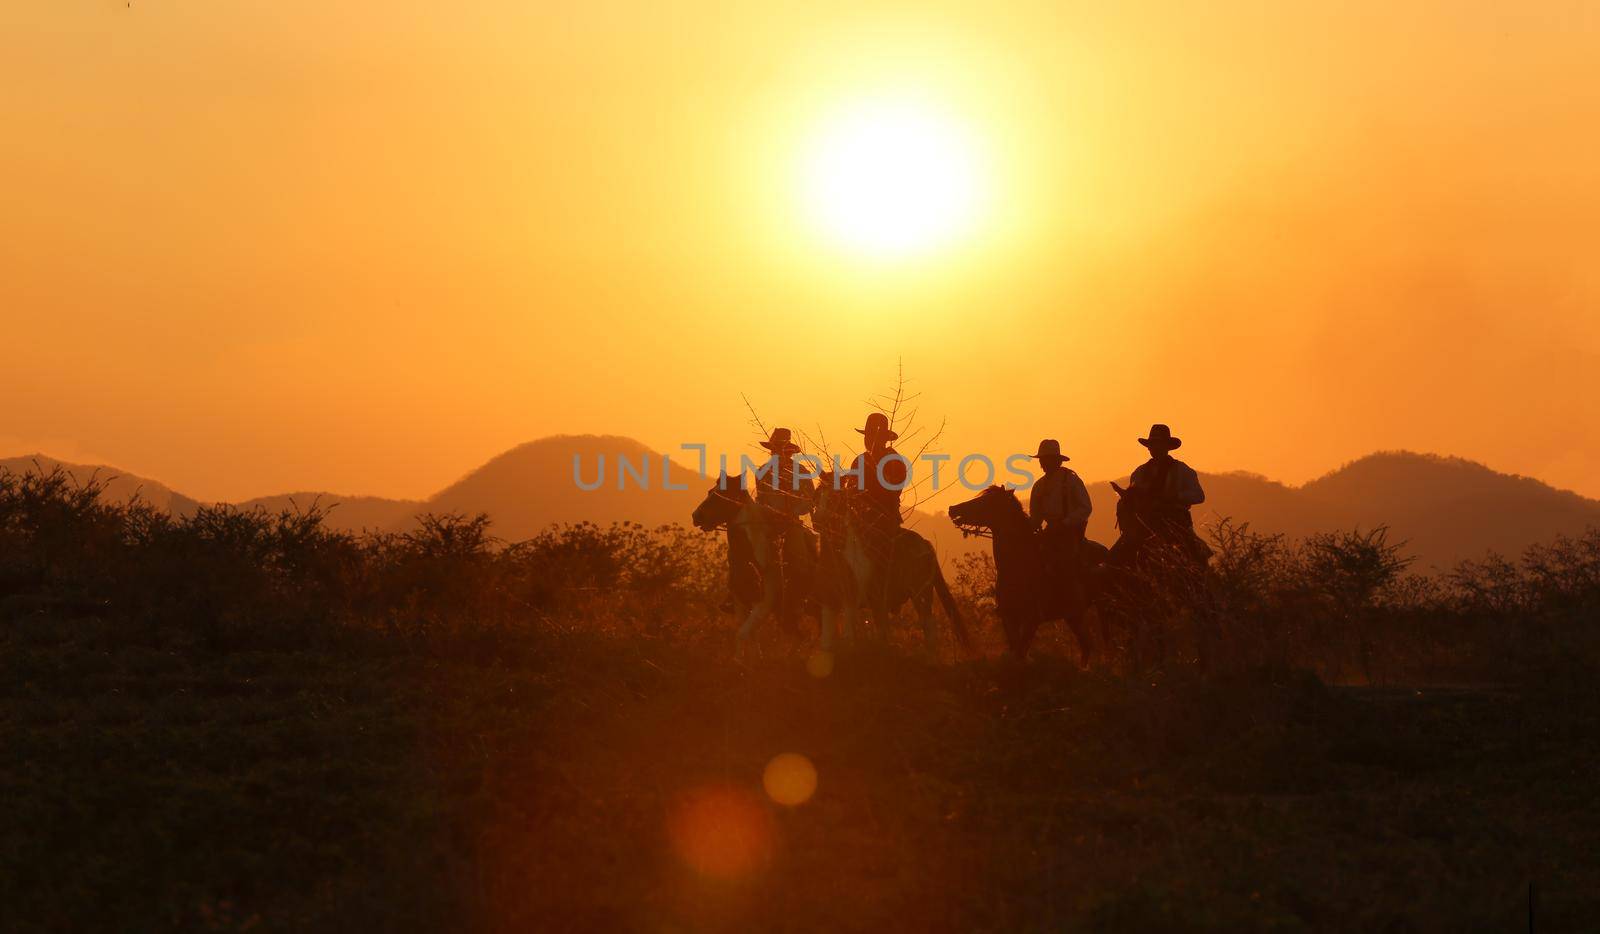 The silhouette of  rider as cowboy outfit costume with a horses and a gun held in the hand against smoke and sunset background by chuanchai